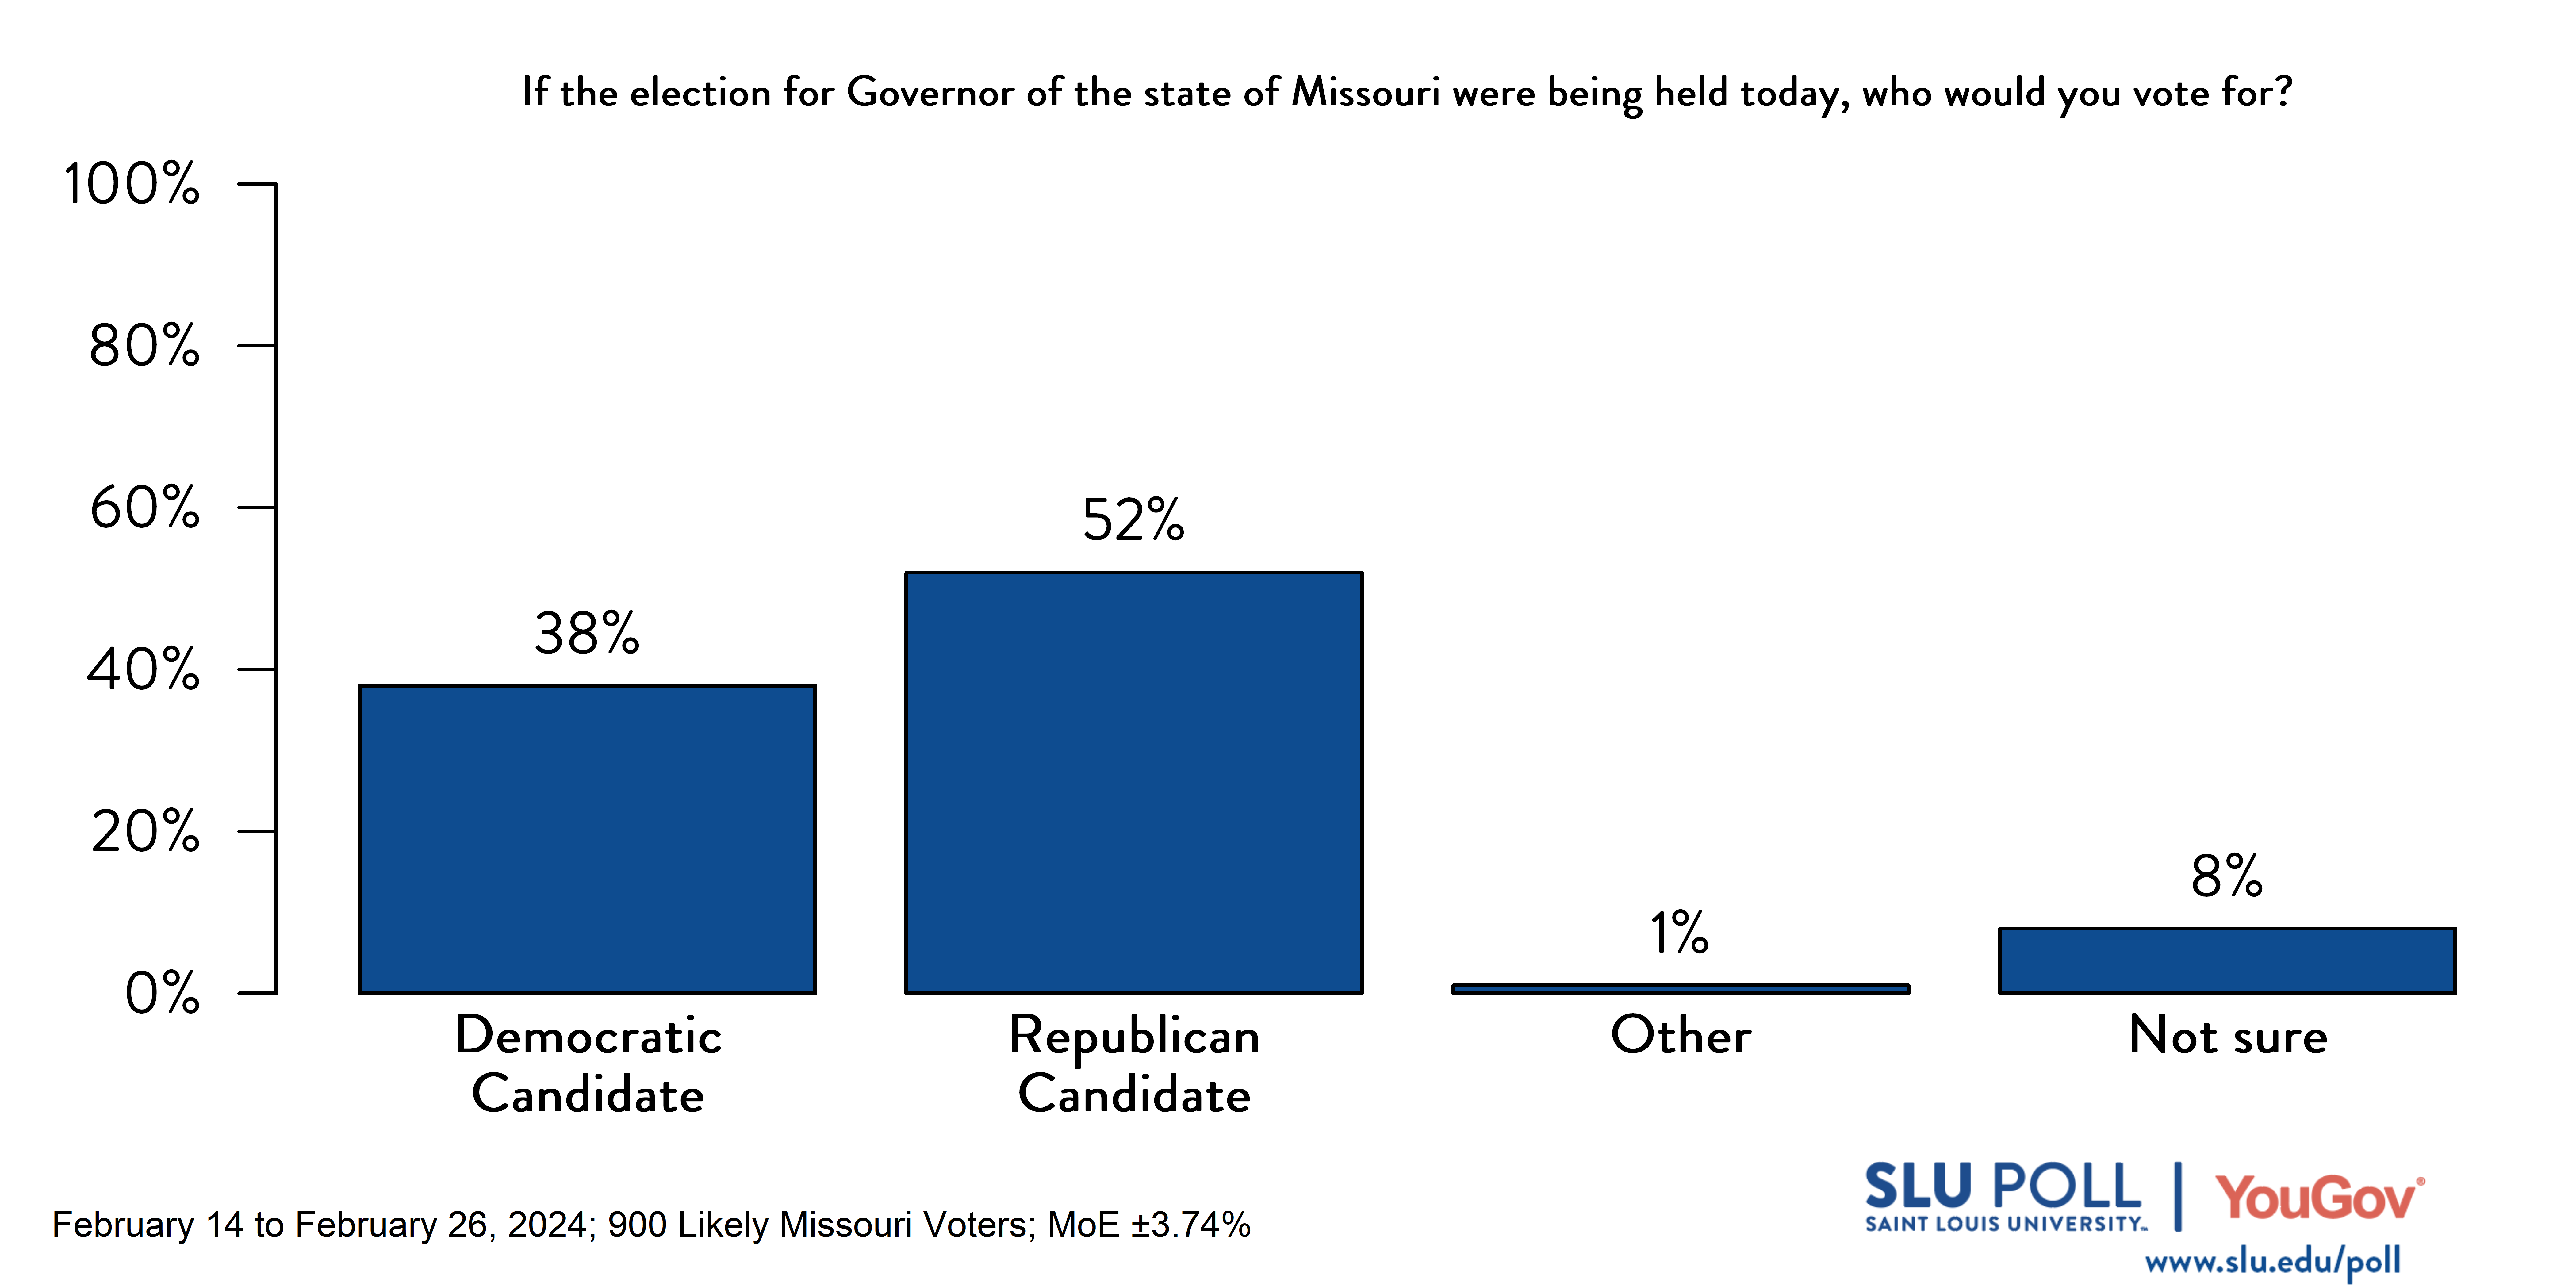 Likely voters' responses to 'If the election for the Governor of the state of Missouri were being held today, who would you vote for?': 38% D, 52% R, 1% Other, and 8% Not sure.